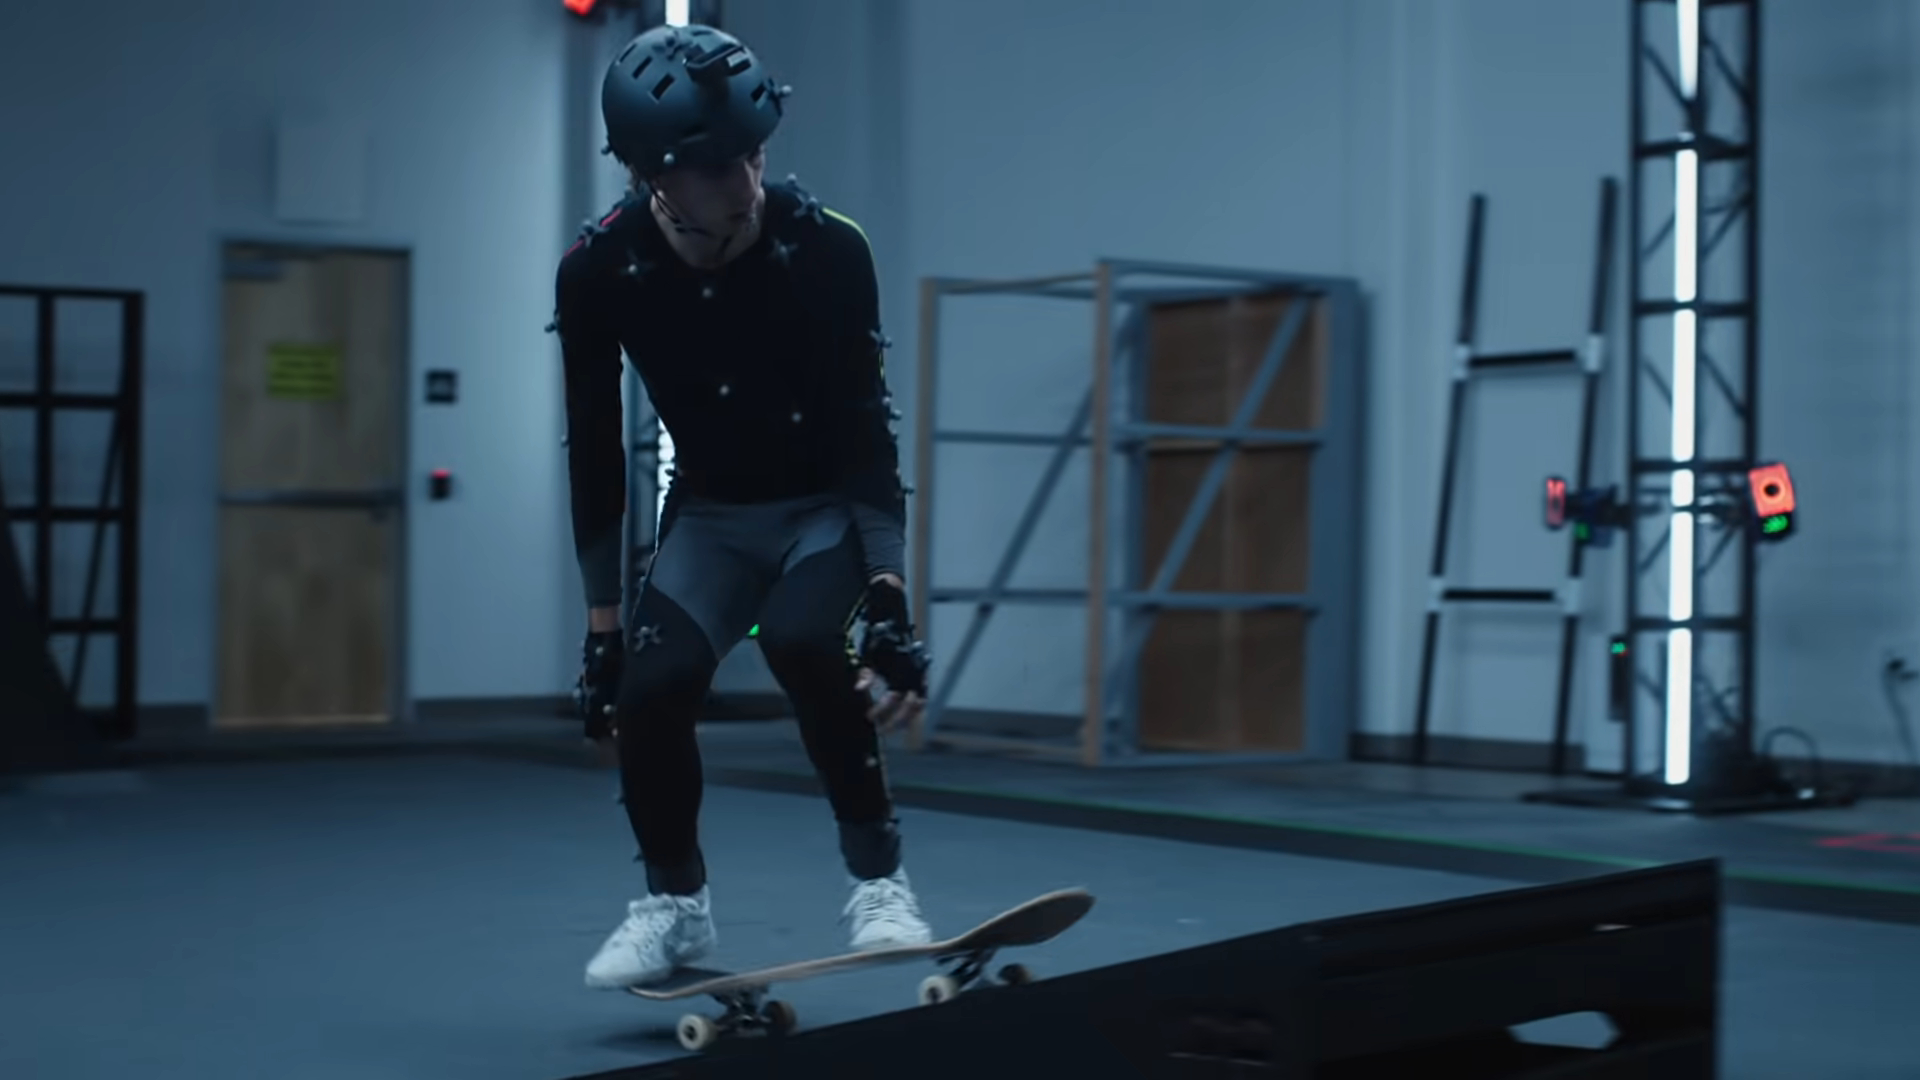 Skate 4: Release Date, Trailer, and More - Xfire